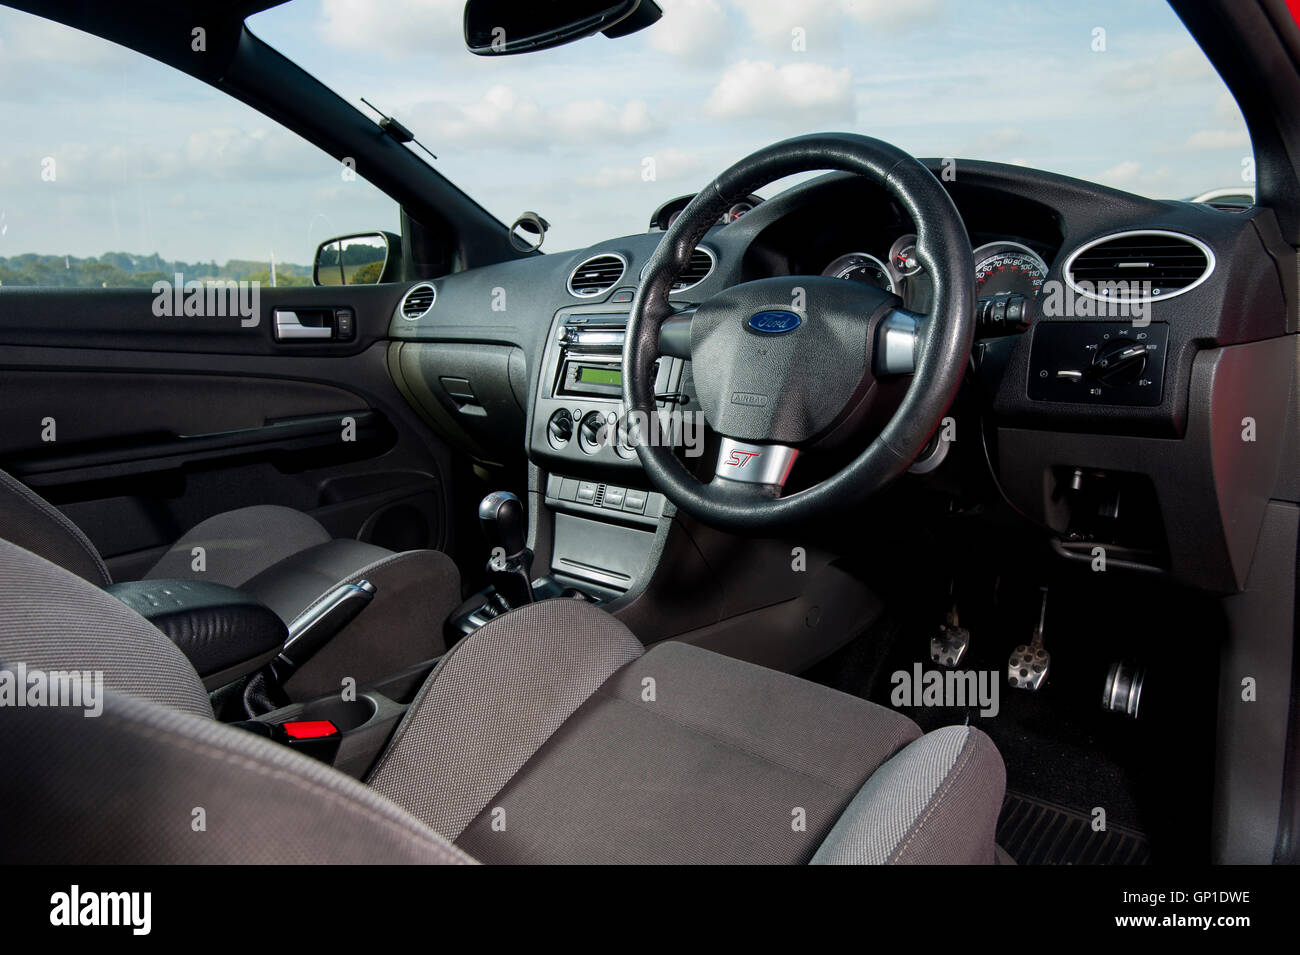 2nd Generation Ford Focus ST high performance hot hatch car interior Stock  Photo - Alamy